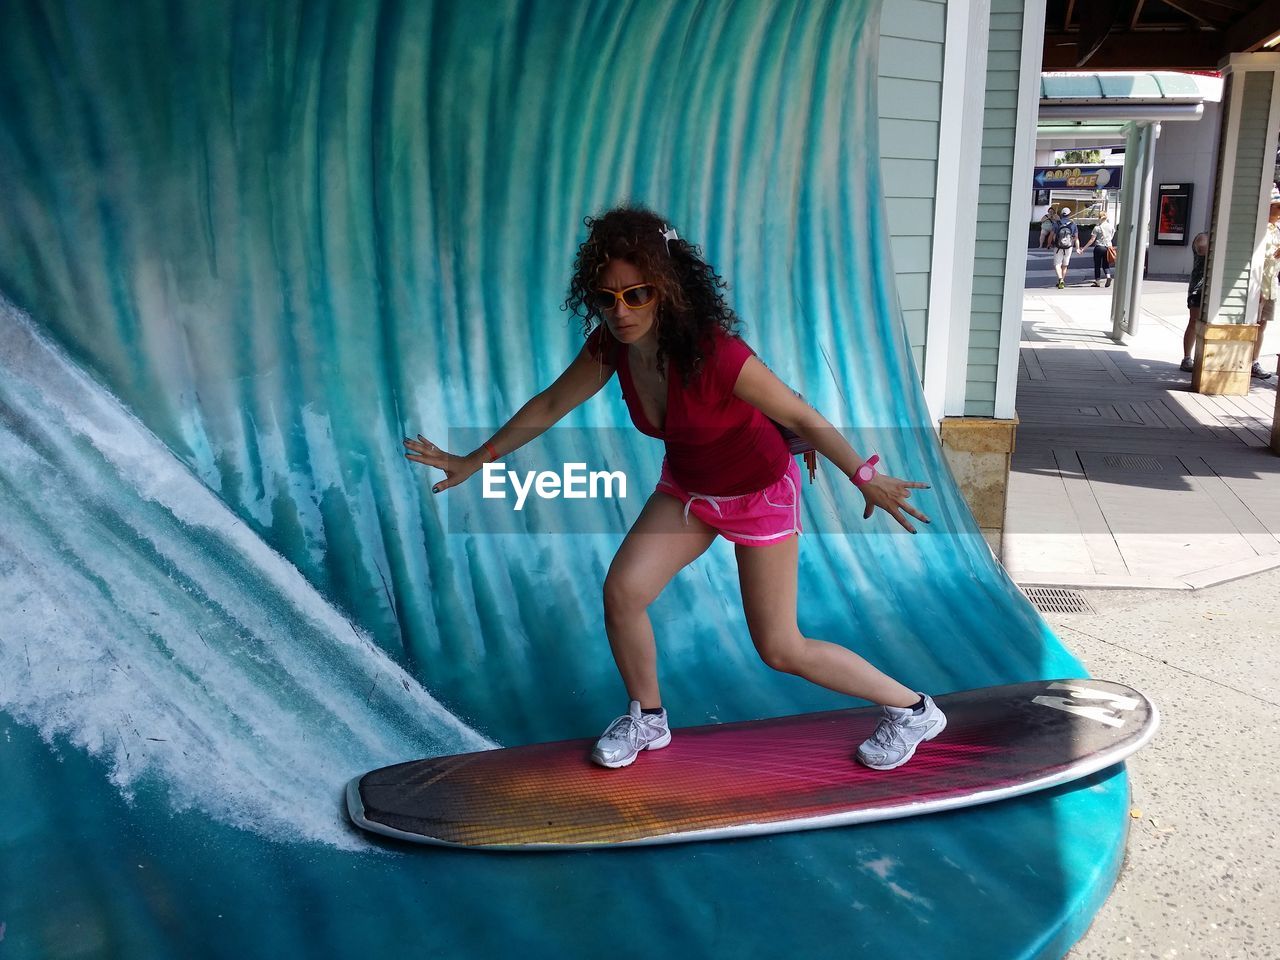 Optical illusion of woman with arms outstretched surfboarding